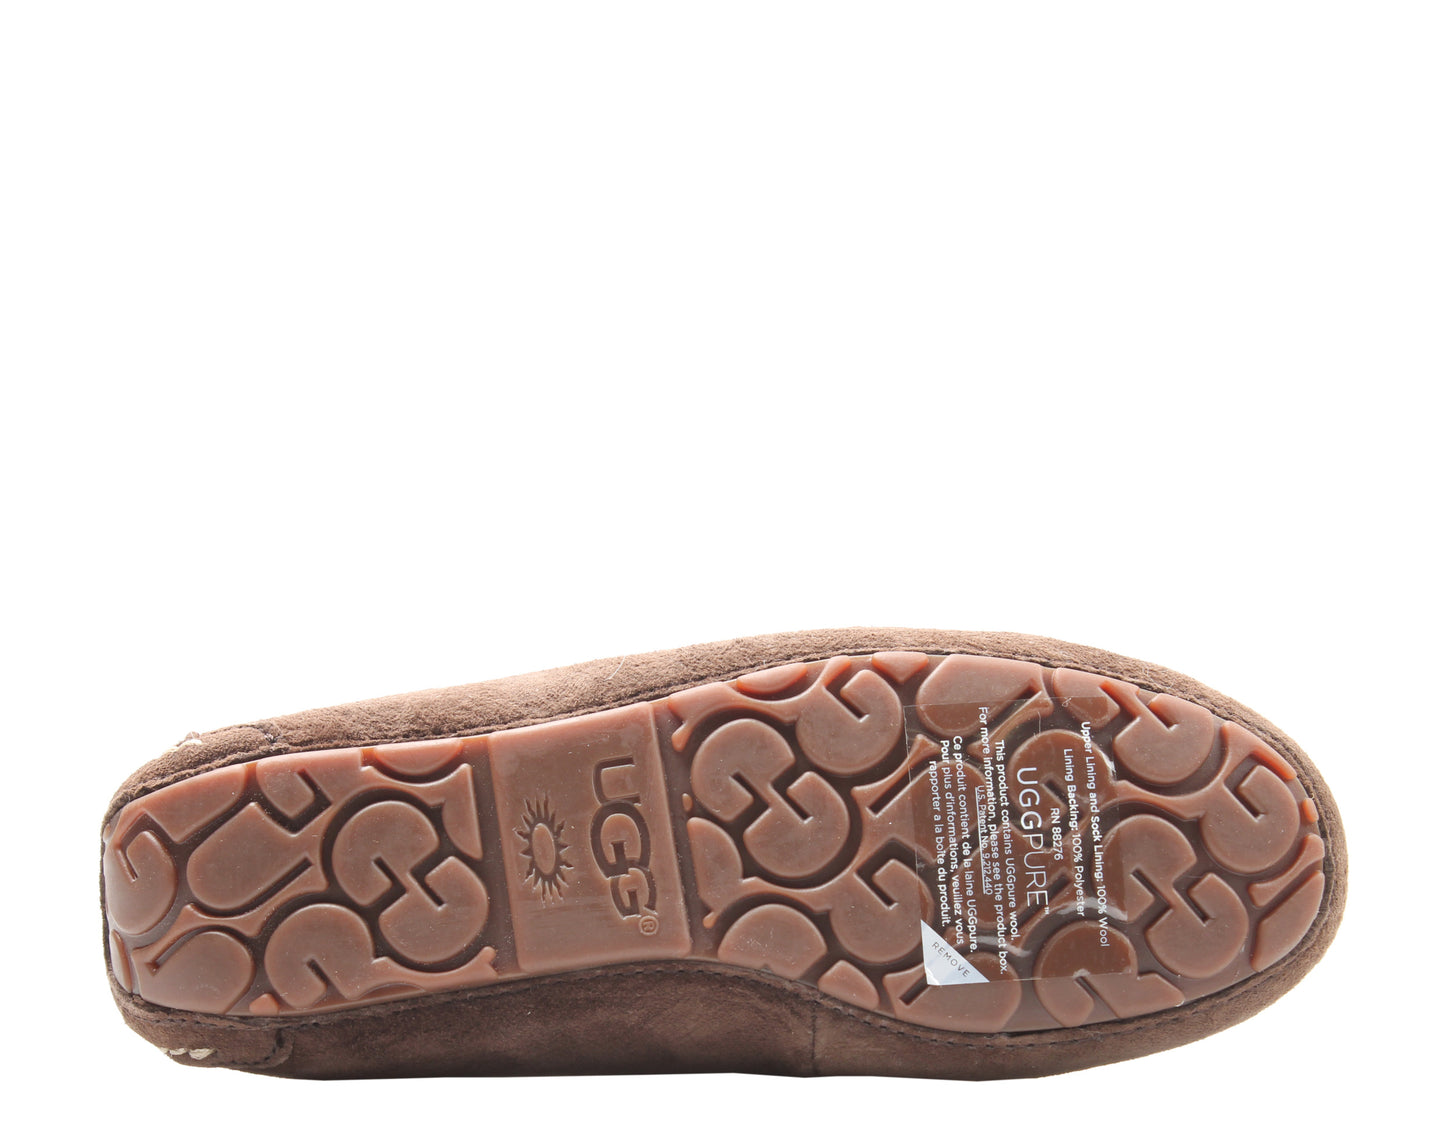 UGG Australia Ansley Moccasin Chocolate Brown Women's Slippers 3312-CHO